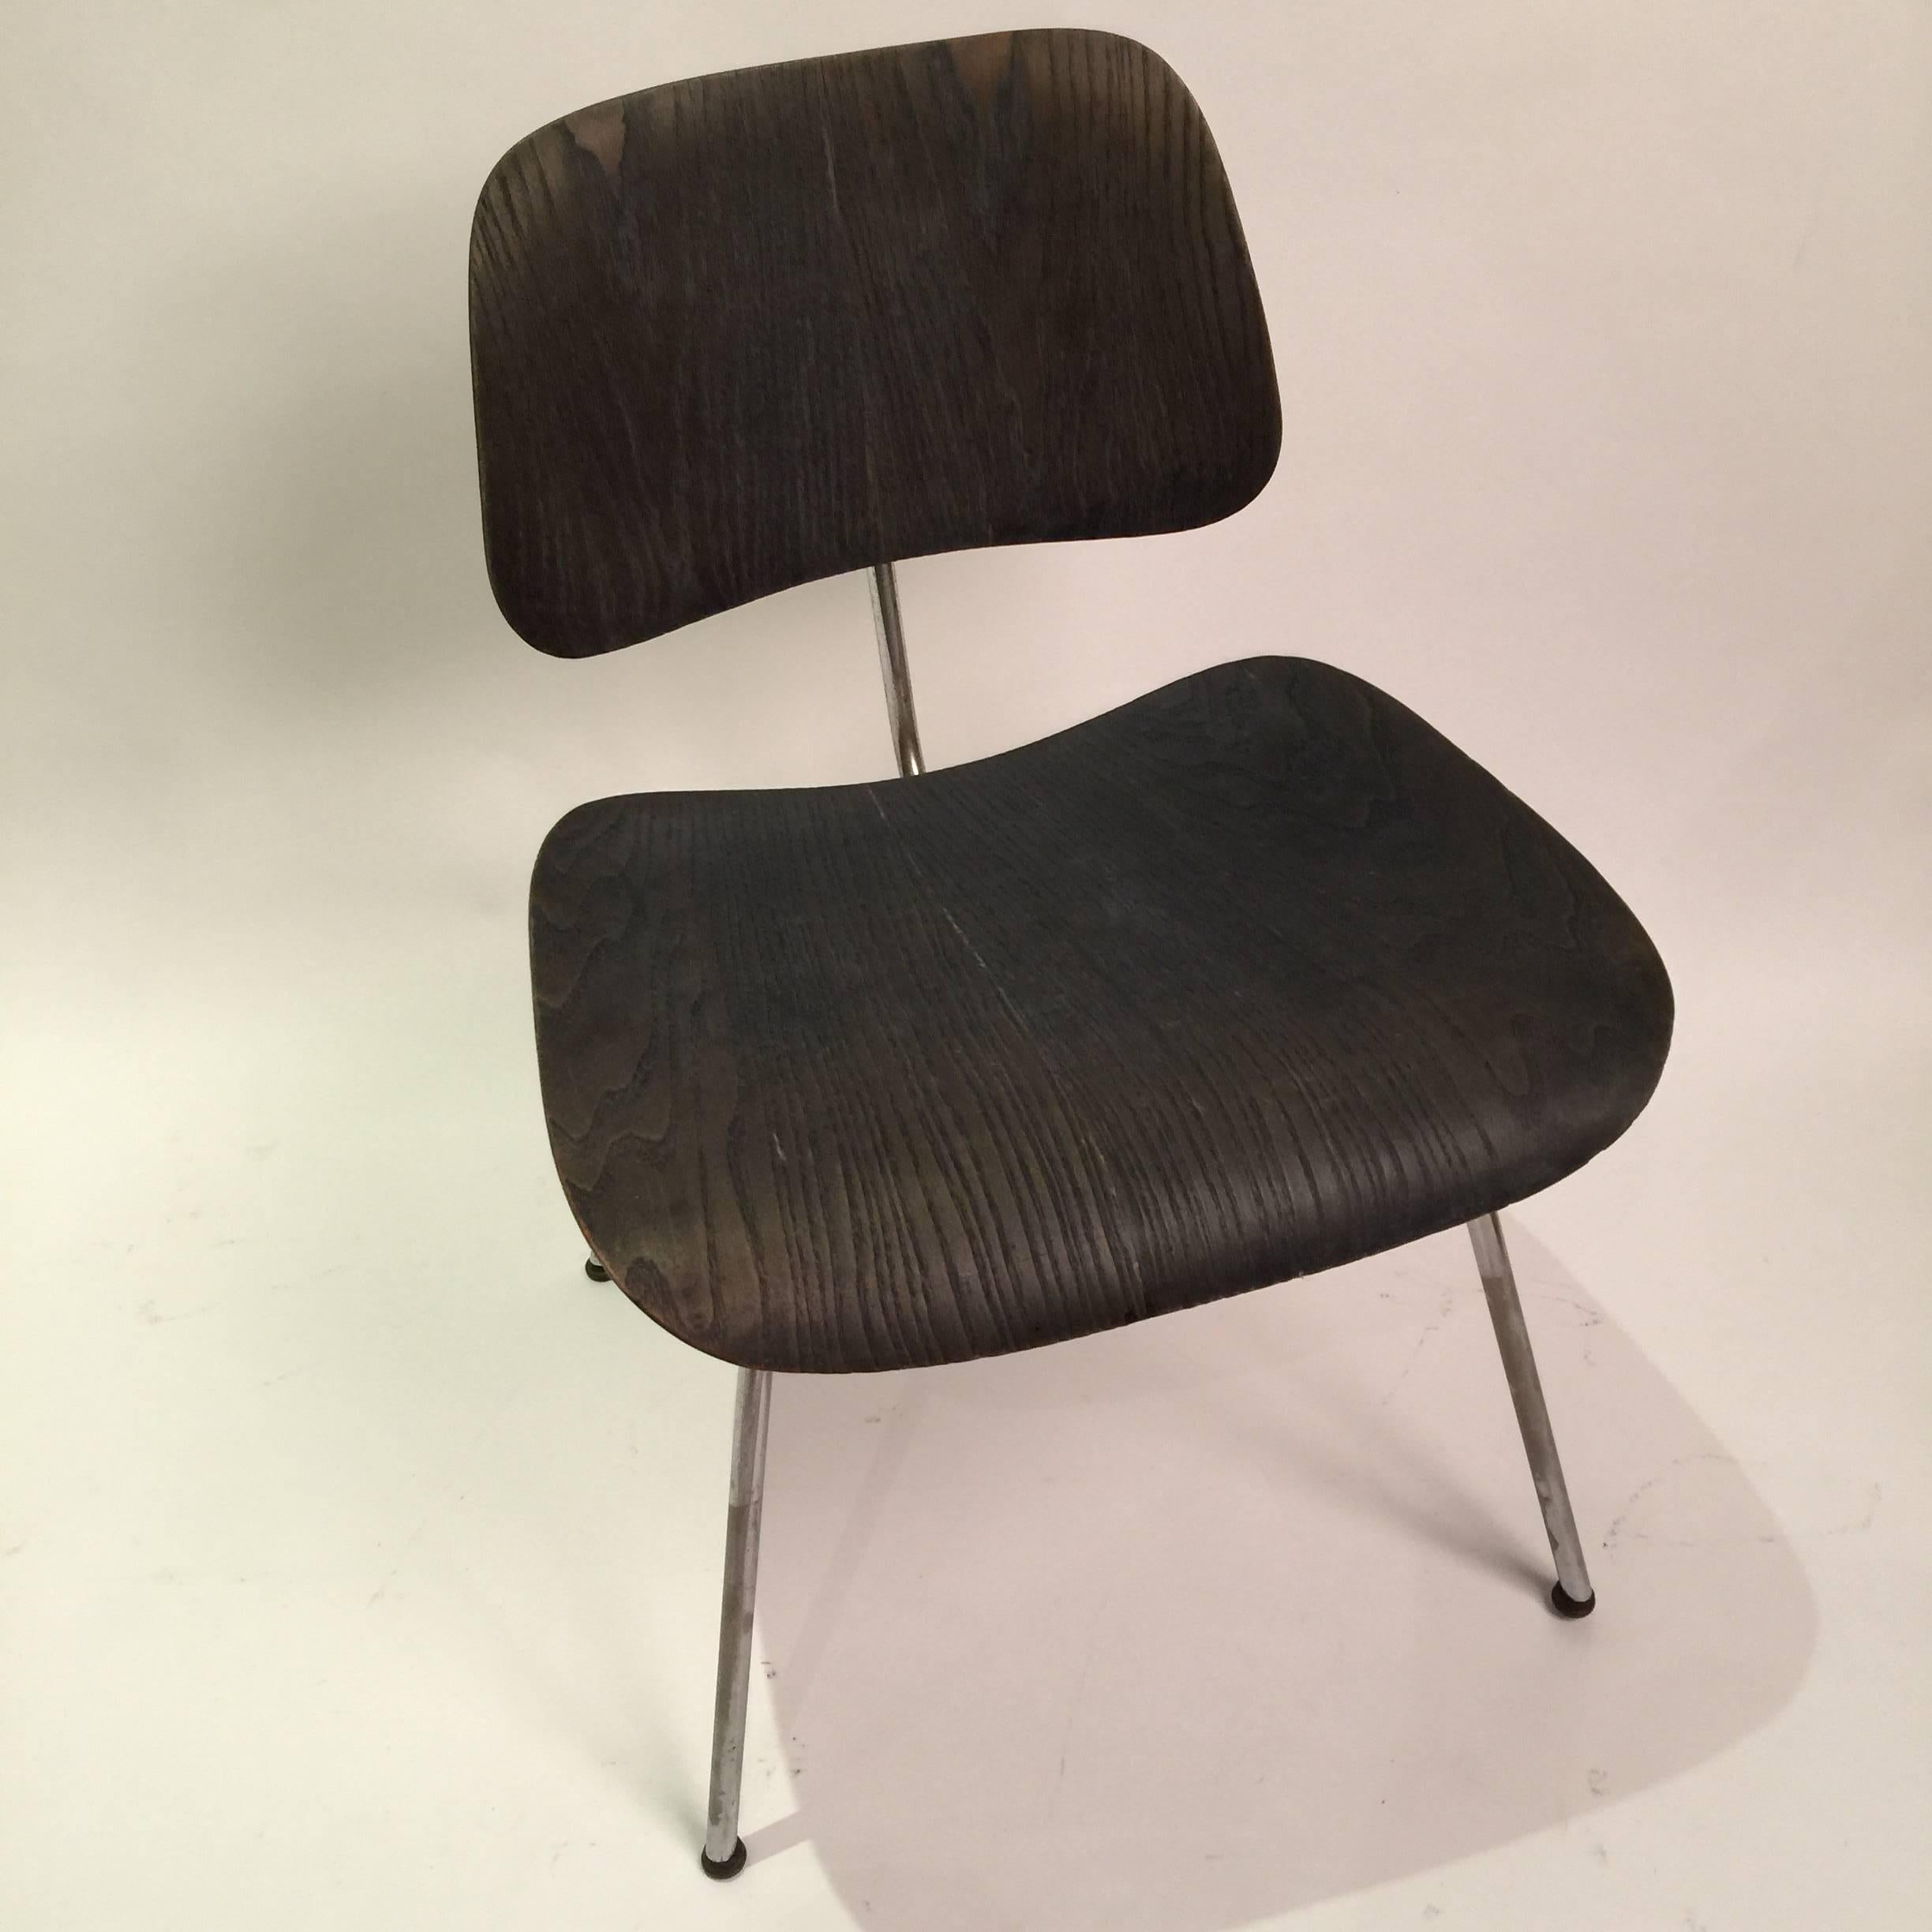 Black aniline DCM dining chairs by Charles and Ray Eames. These first edition chairs were produced by Evans manufacturing and distributed by Herman Miller. Chair has labels intact and original domes of silence glides. Excellent patina.